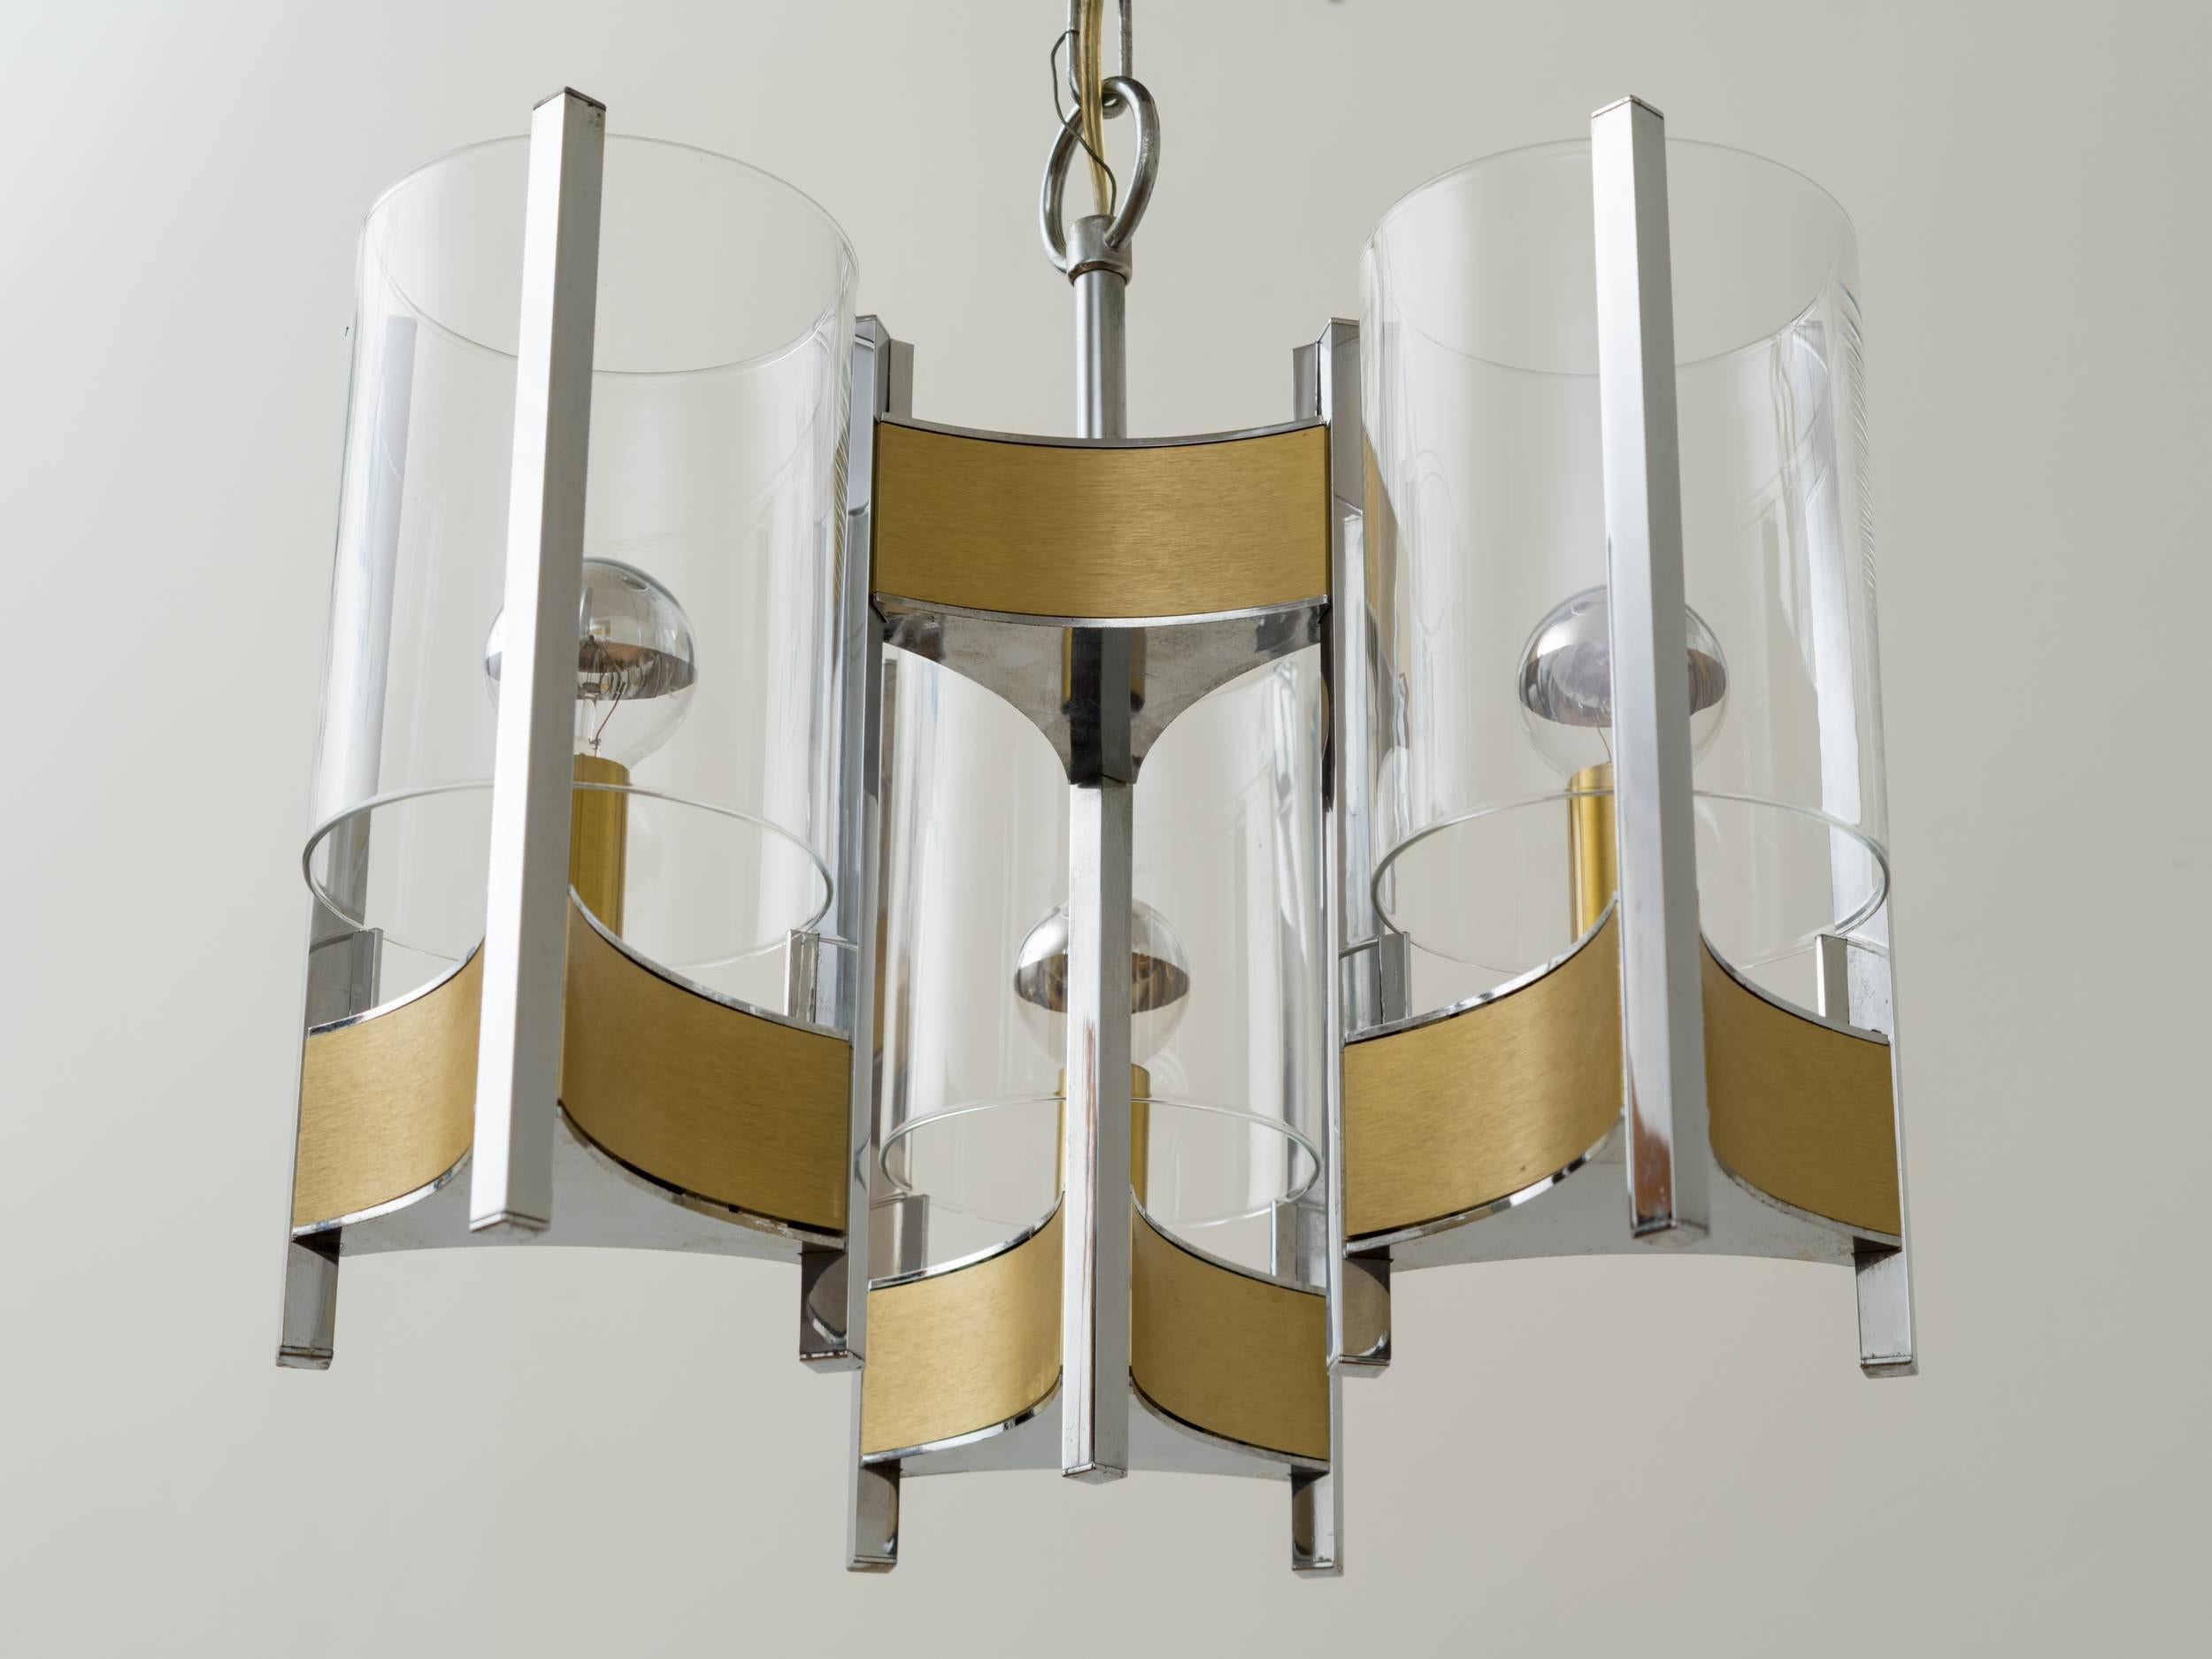 Gaetano Sciolari brushed brass and chrome chandelier with glass hurricane shades, illuminated with partial mercury glass light bulbs. Circular chrome ceiling cap. Height can be adjusted with additional chain links, Italy, circa 1970s.